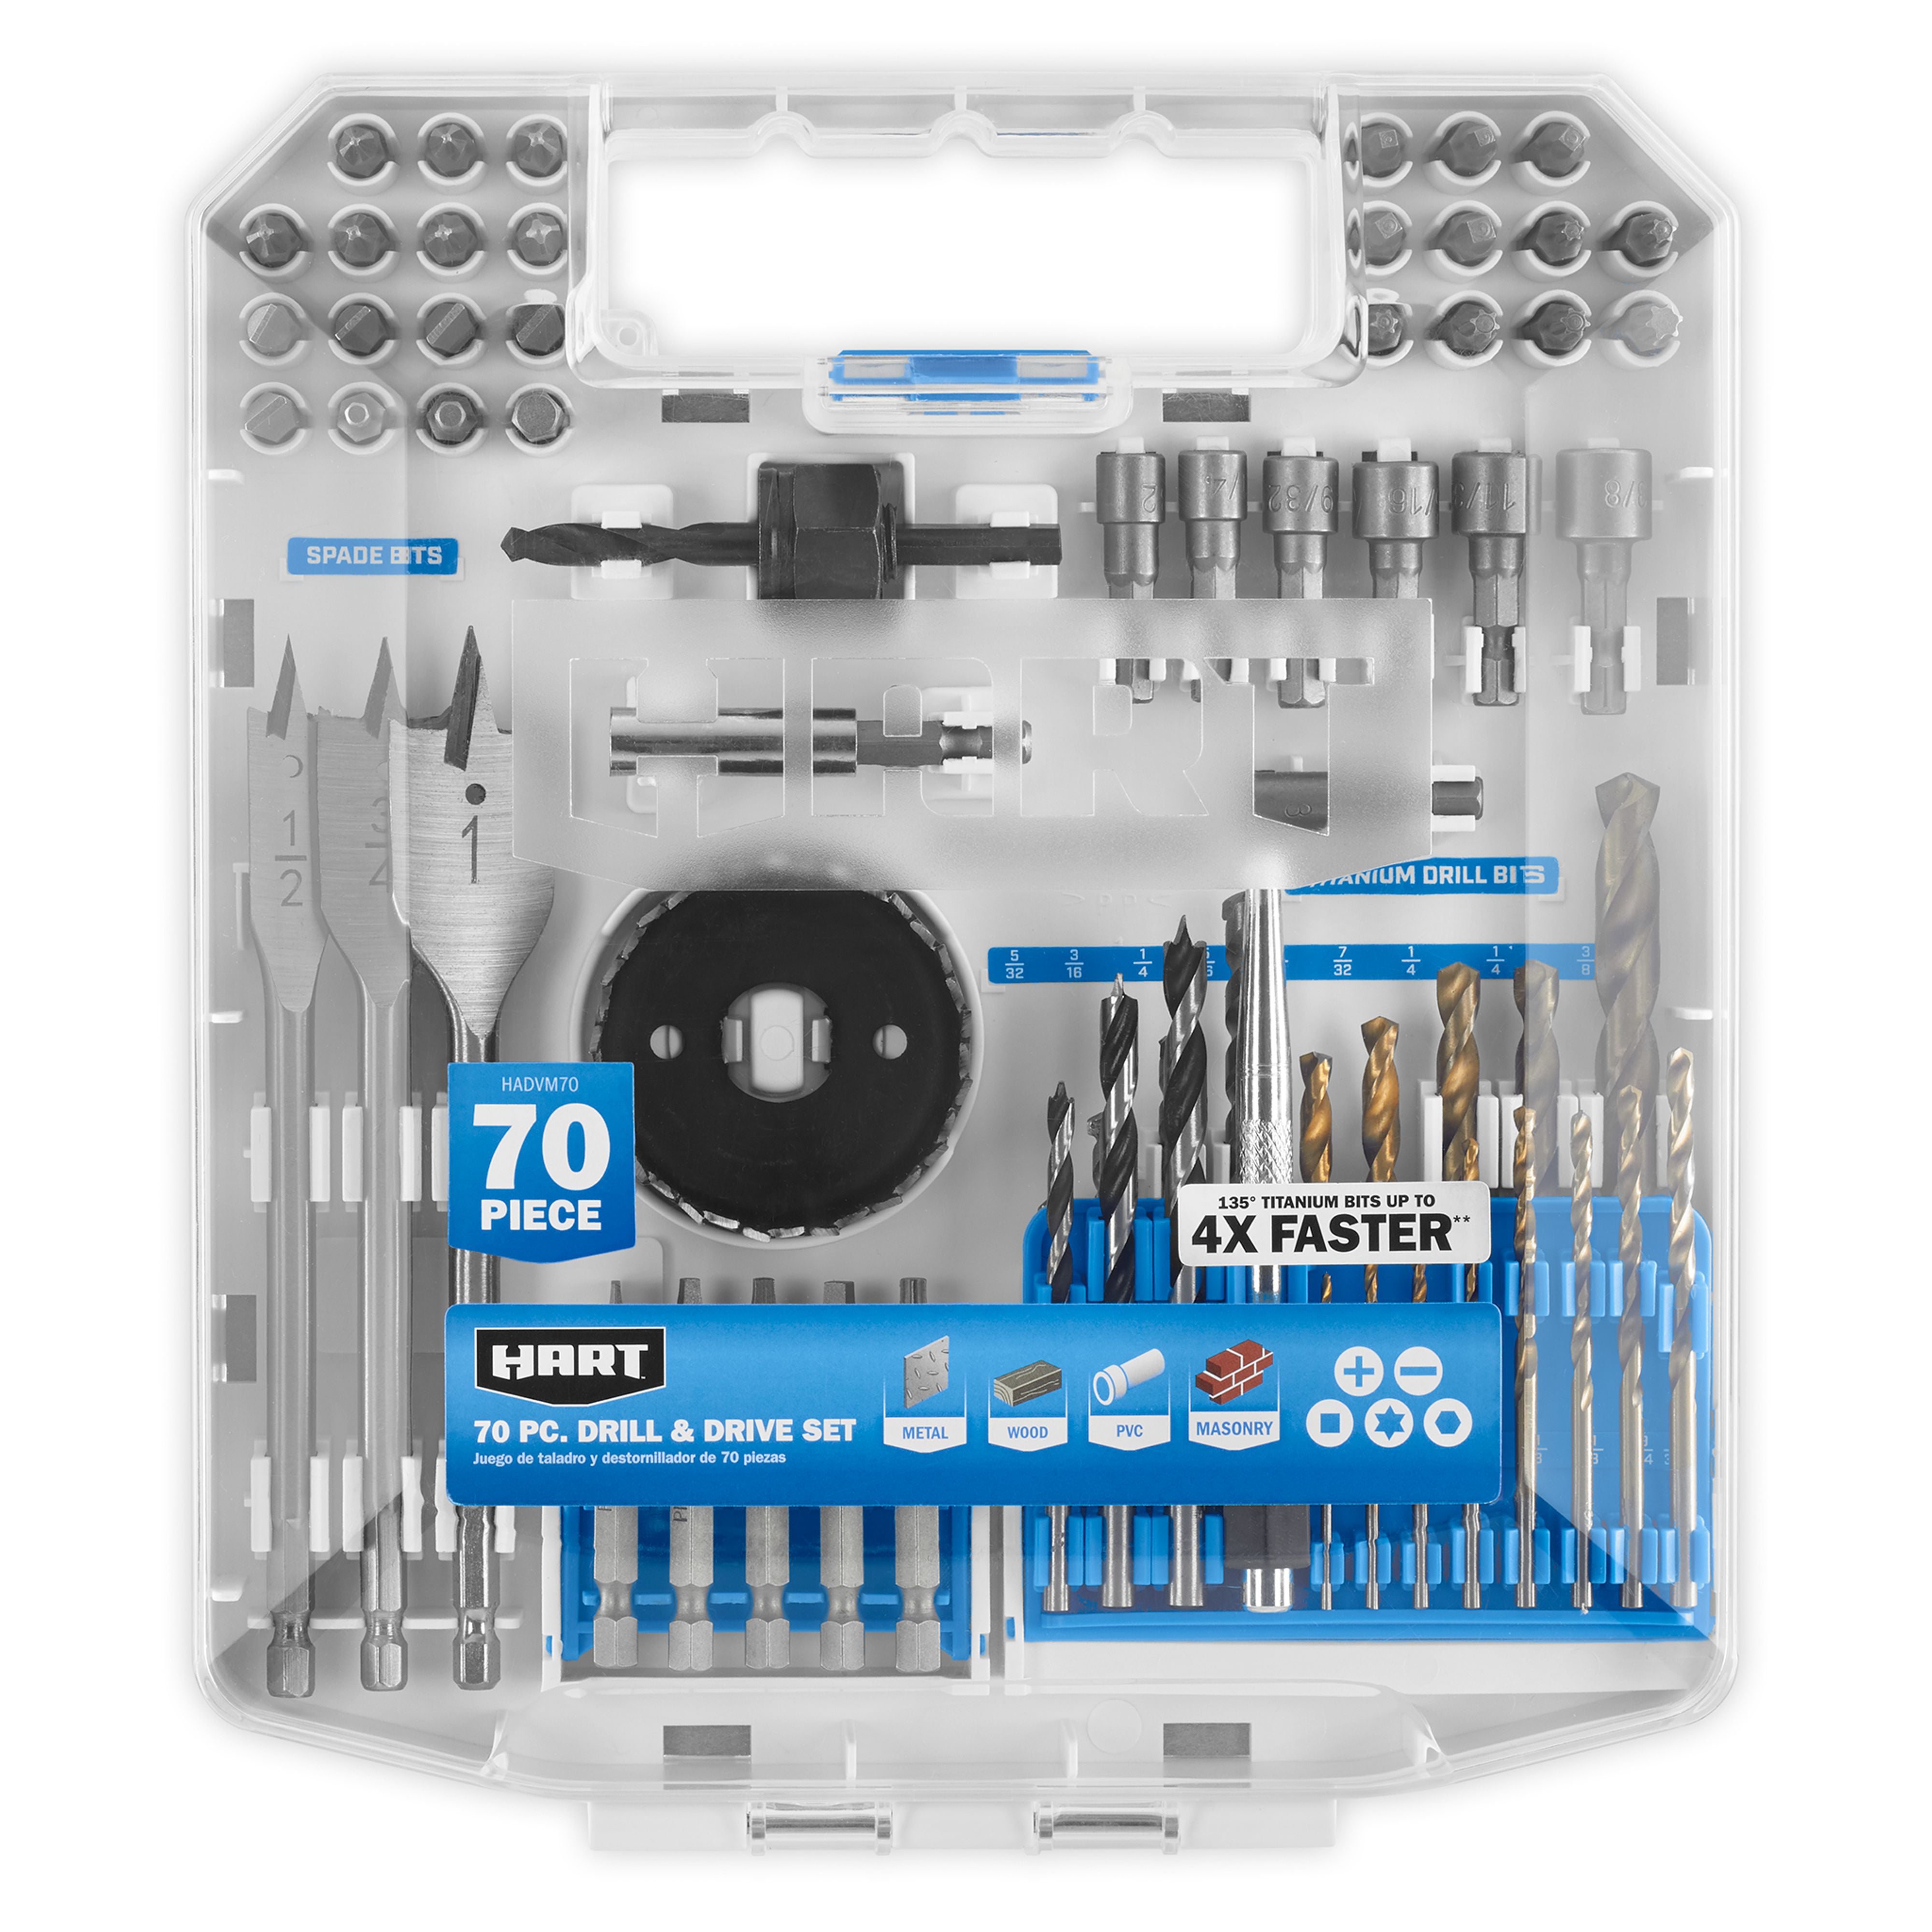 70-Piece Hart Drill and Drive Bit Set w/ Protective Storage Case $13.98 + Free S&H w/ Walmart+ or $35+